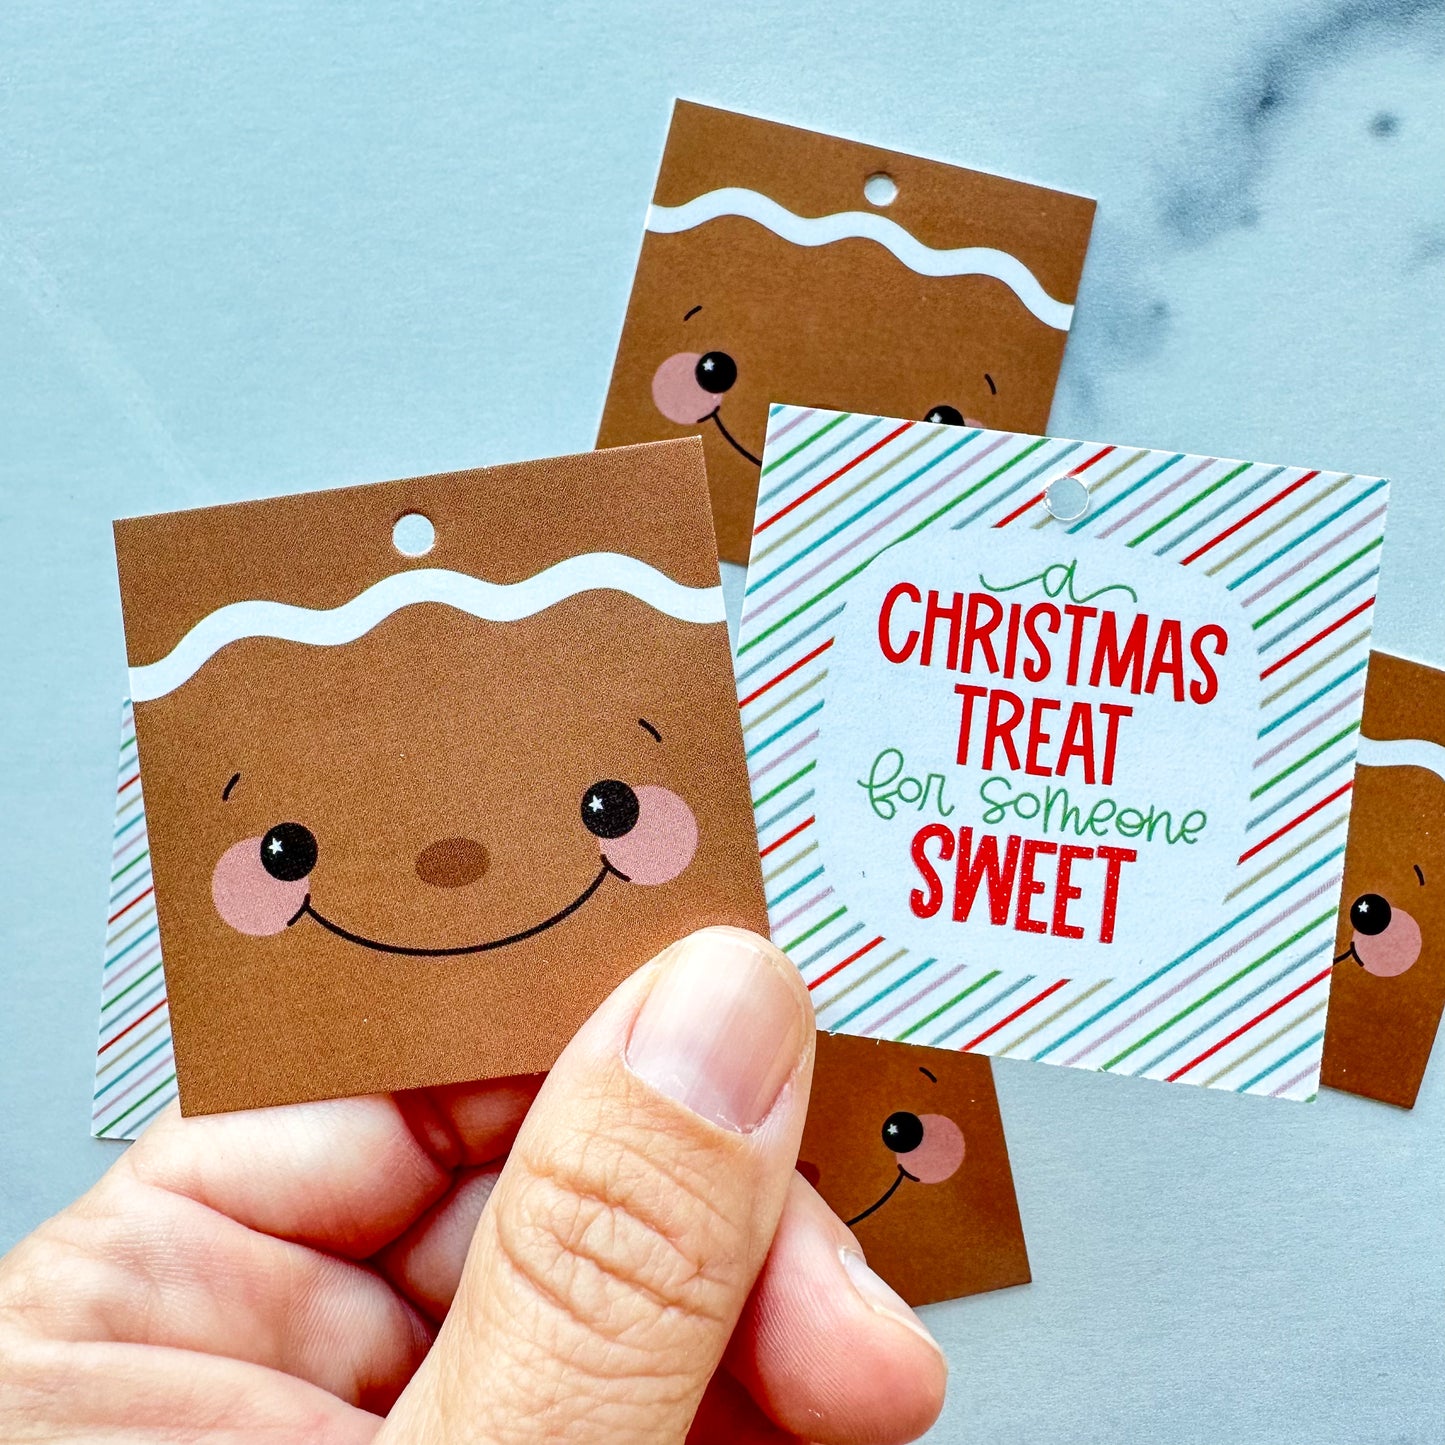 Gingerbread Face / Sweet Treat 2” x 2” Printed Tags: Set of 25